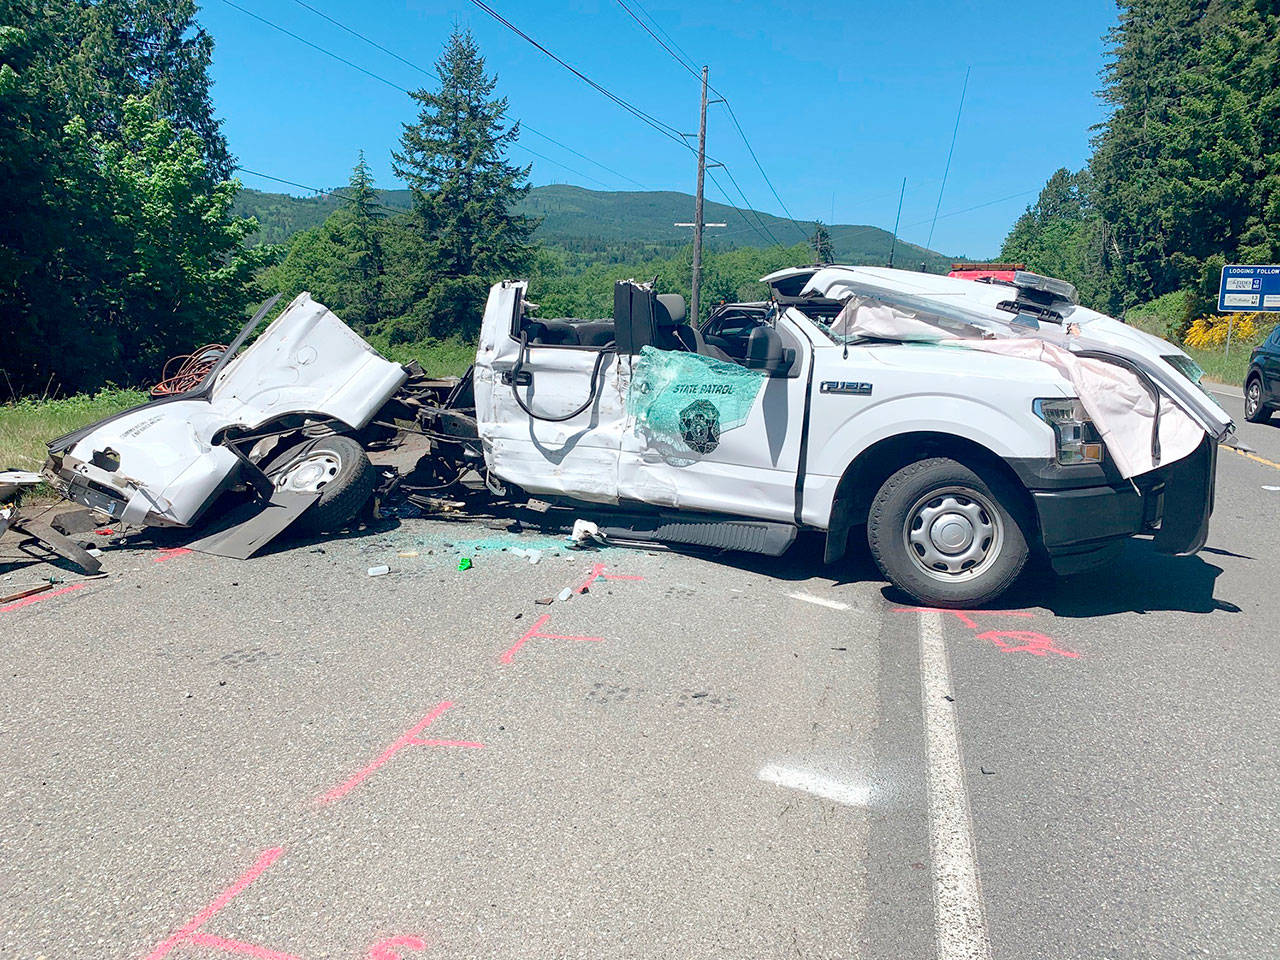 A Washington State Patrol officer was seriously injured Tuesday morning when the driver of a stolen pickup struck his vehicle on U.S. Highway 101 at Discovery Bay. (Photo courtesy of the Washington State Patrol)